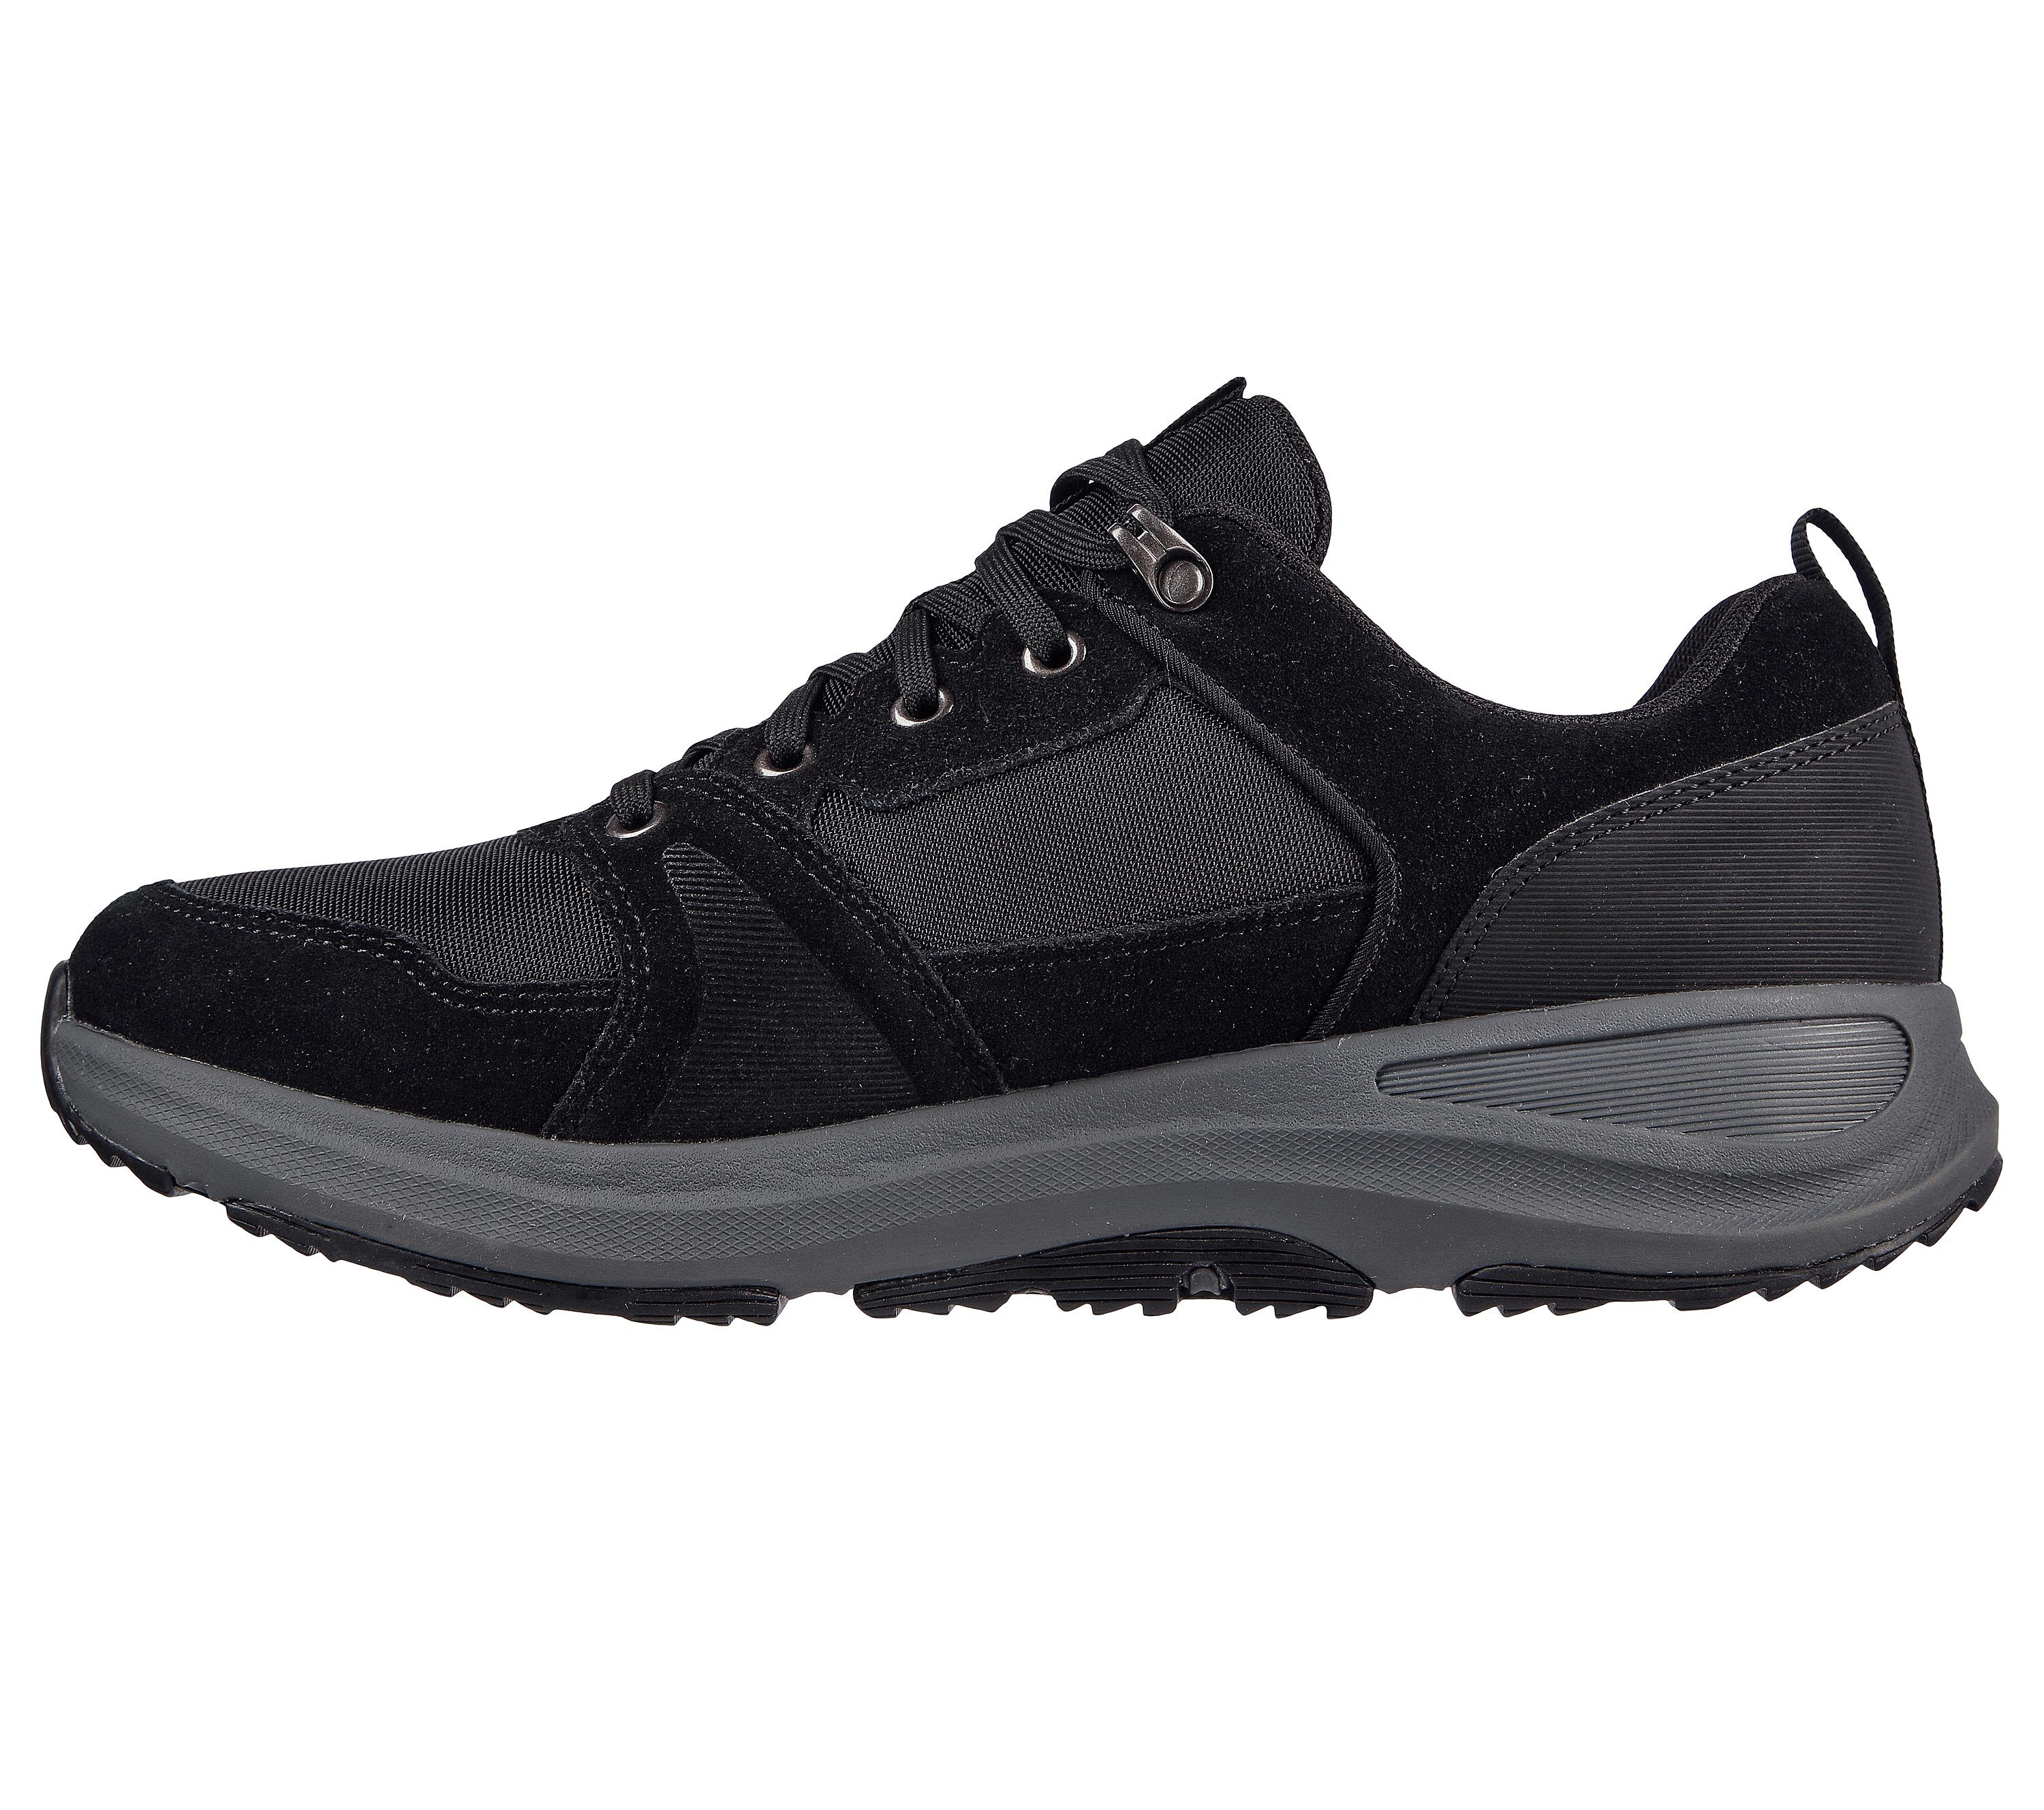 Go Walk Outdoor - Massif - Black / Charcoal Leather/Synthetic